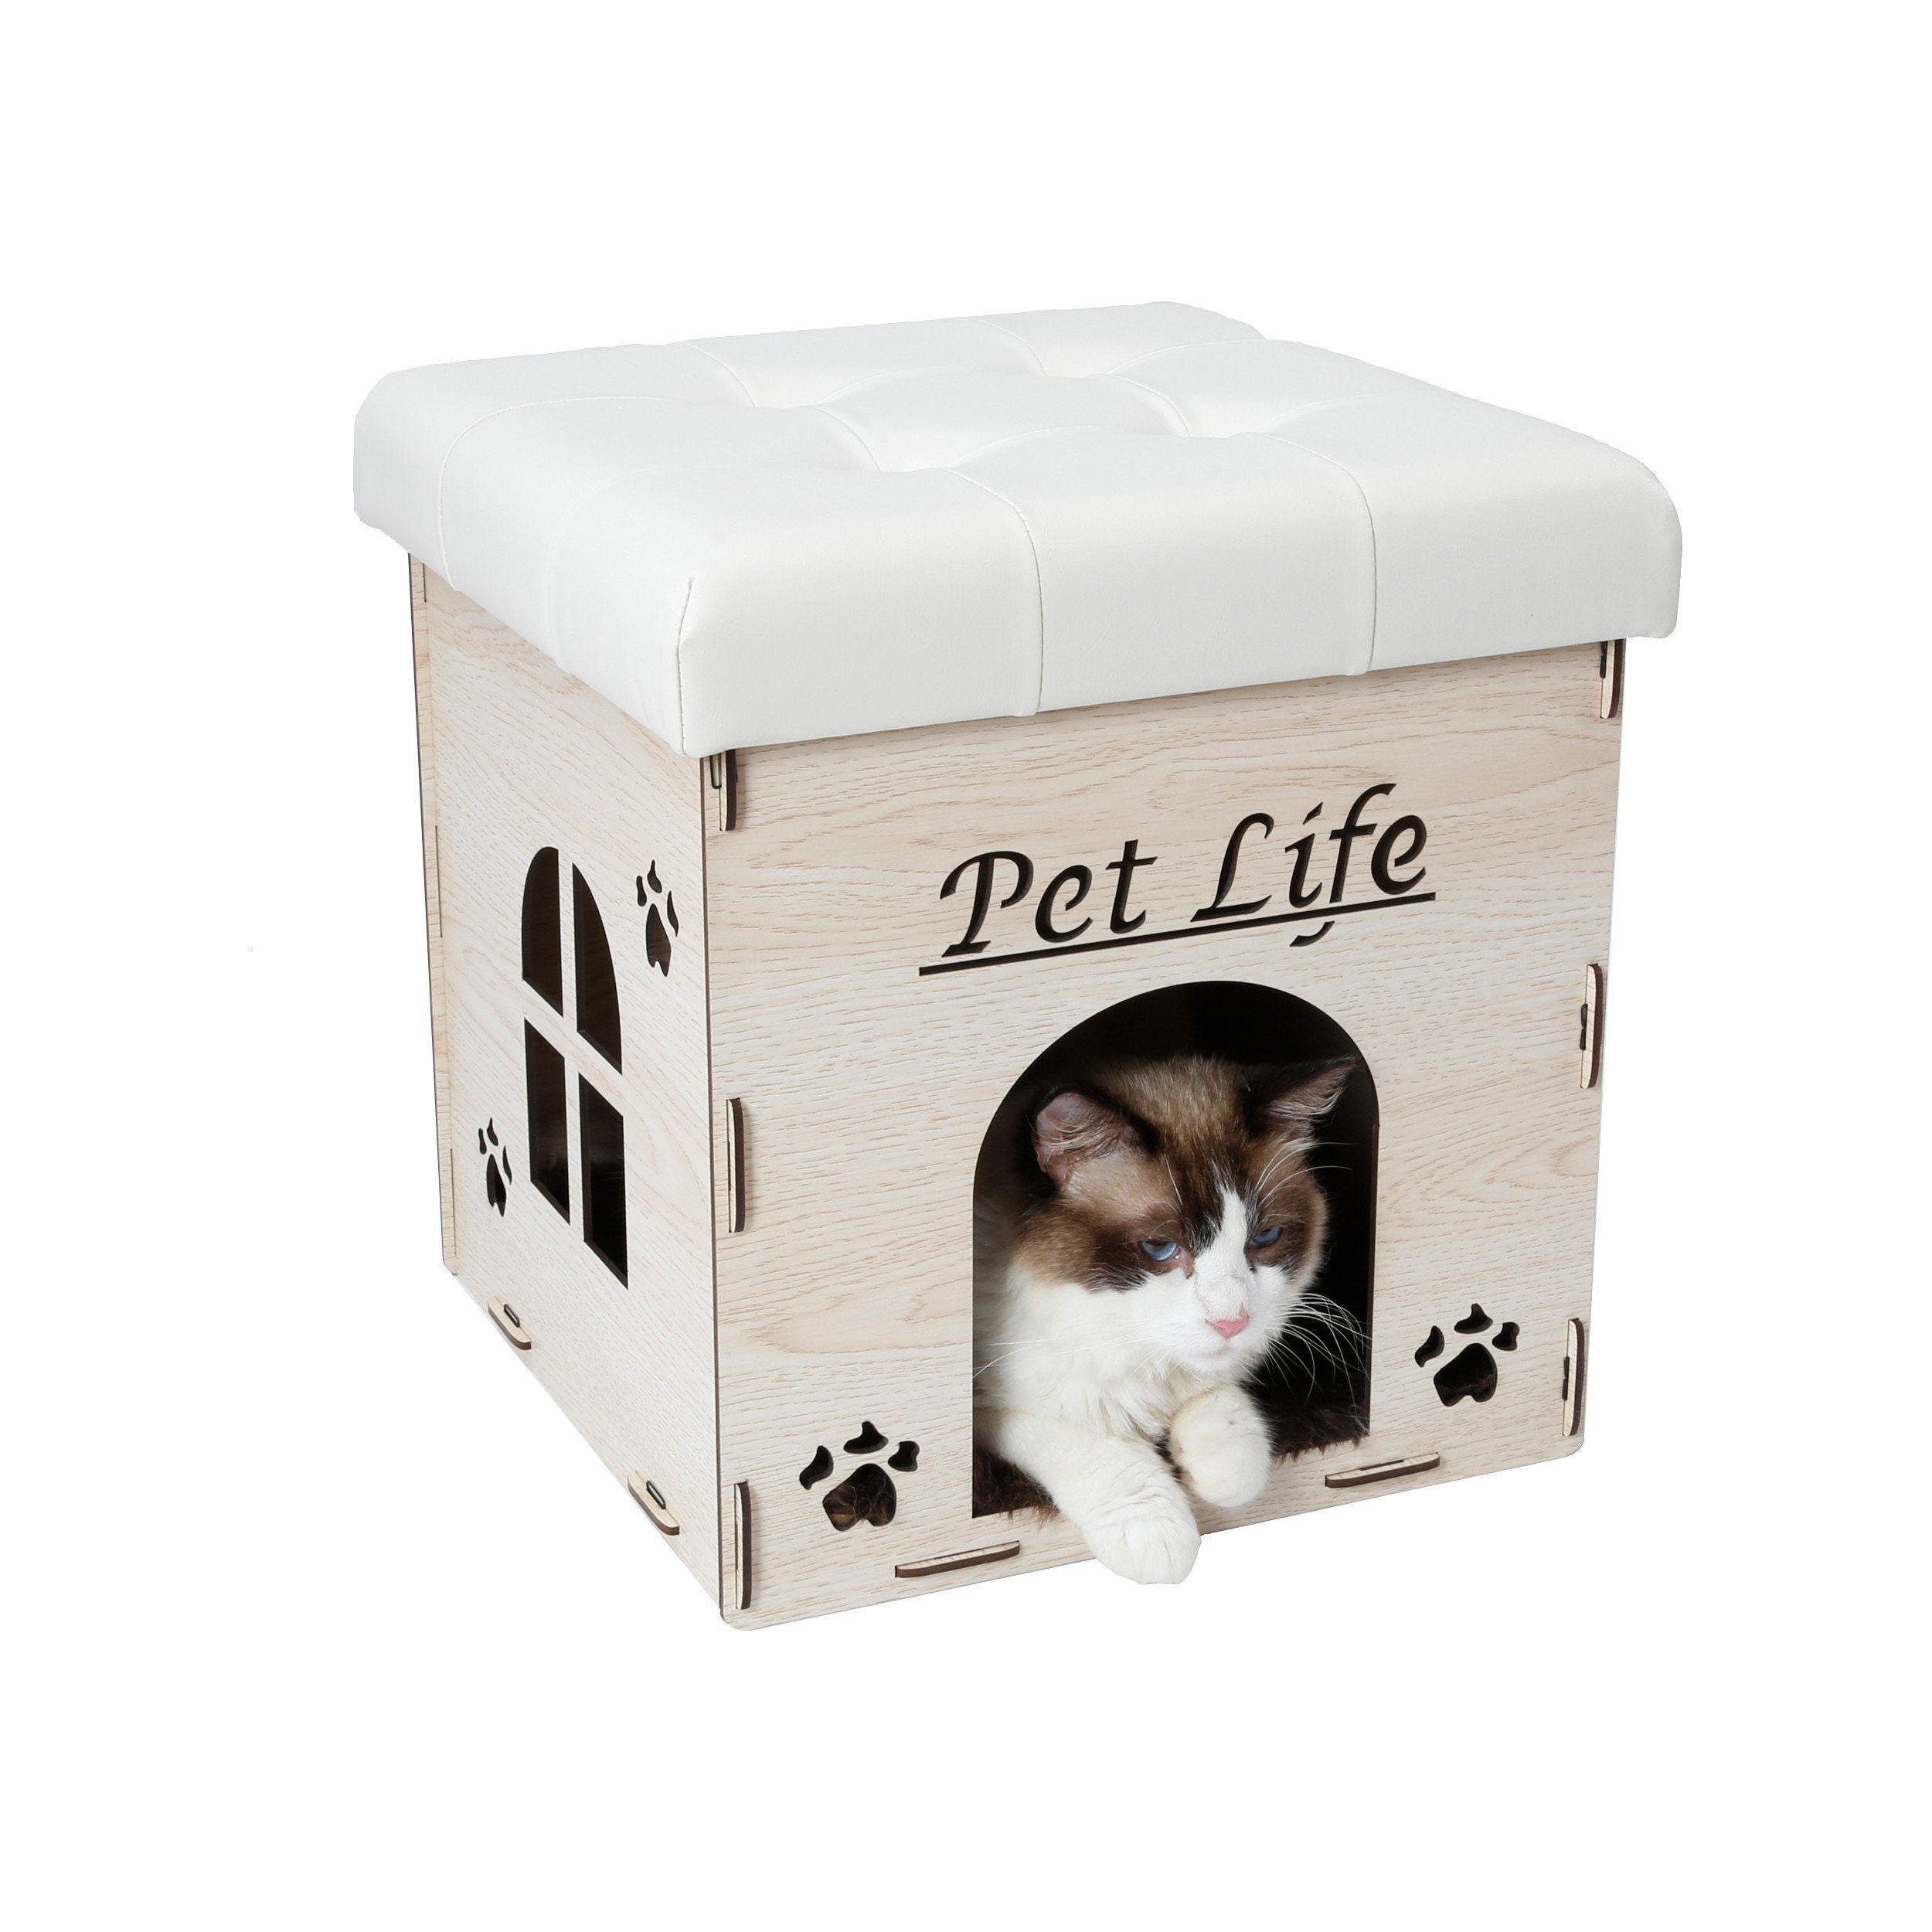 Pet Life ® 'Kitty Kallapse' Collapsible Folding Kitty Cat House Tree Bed Ottoman Bench Furniture White 